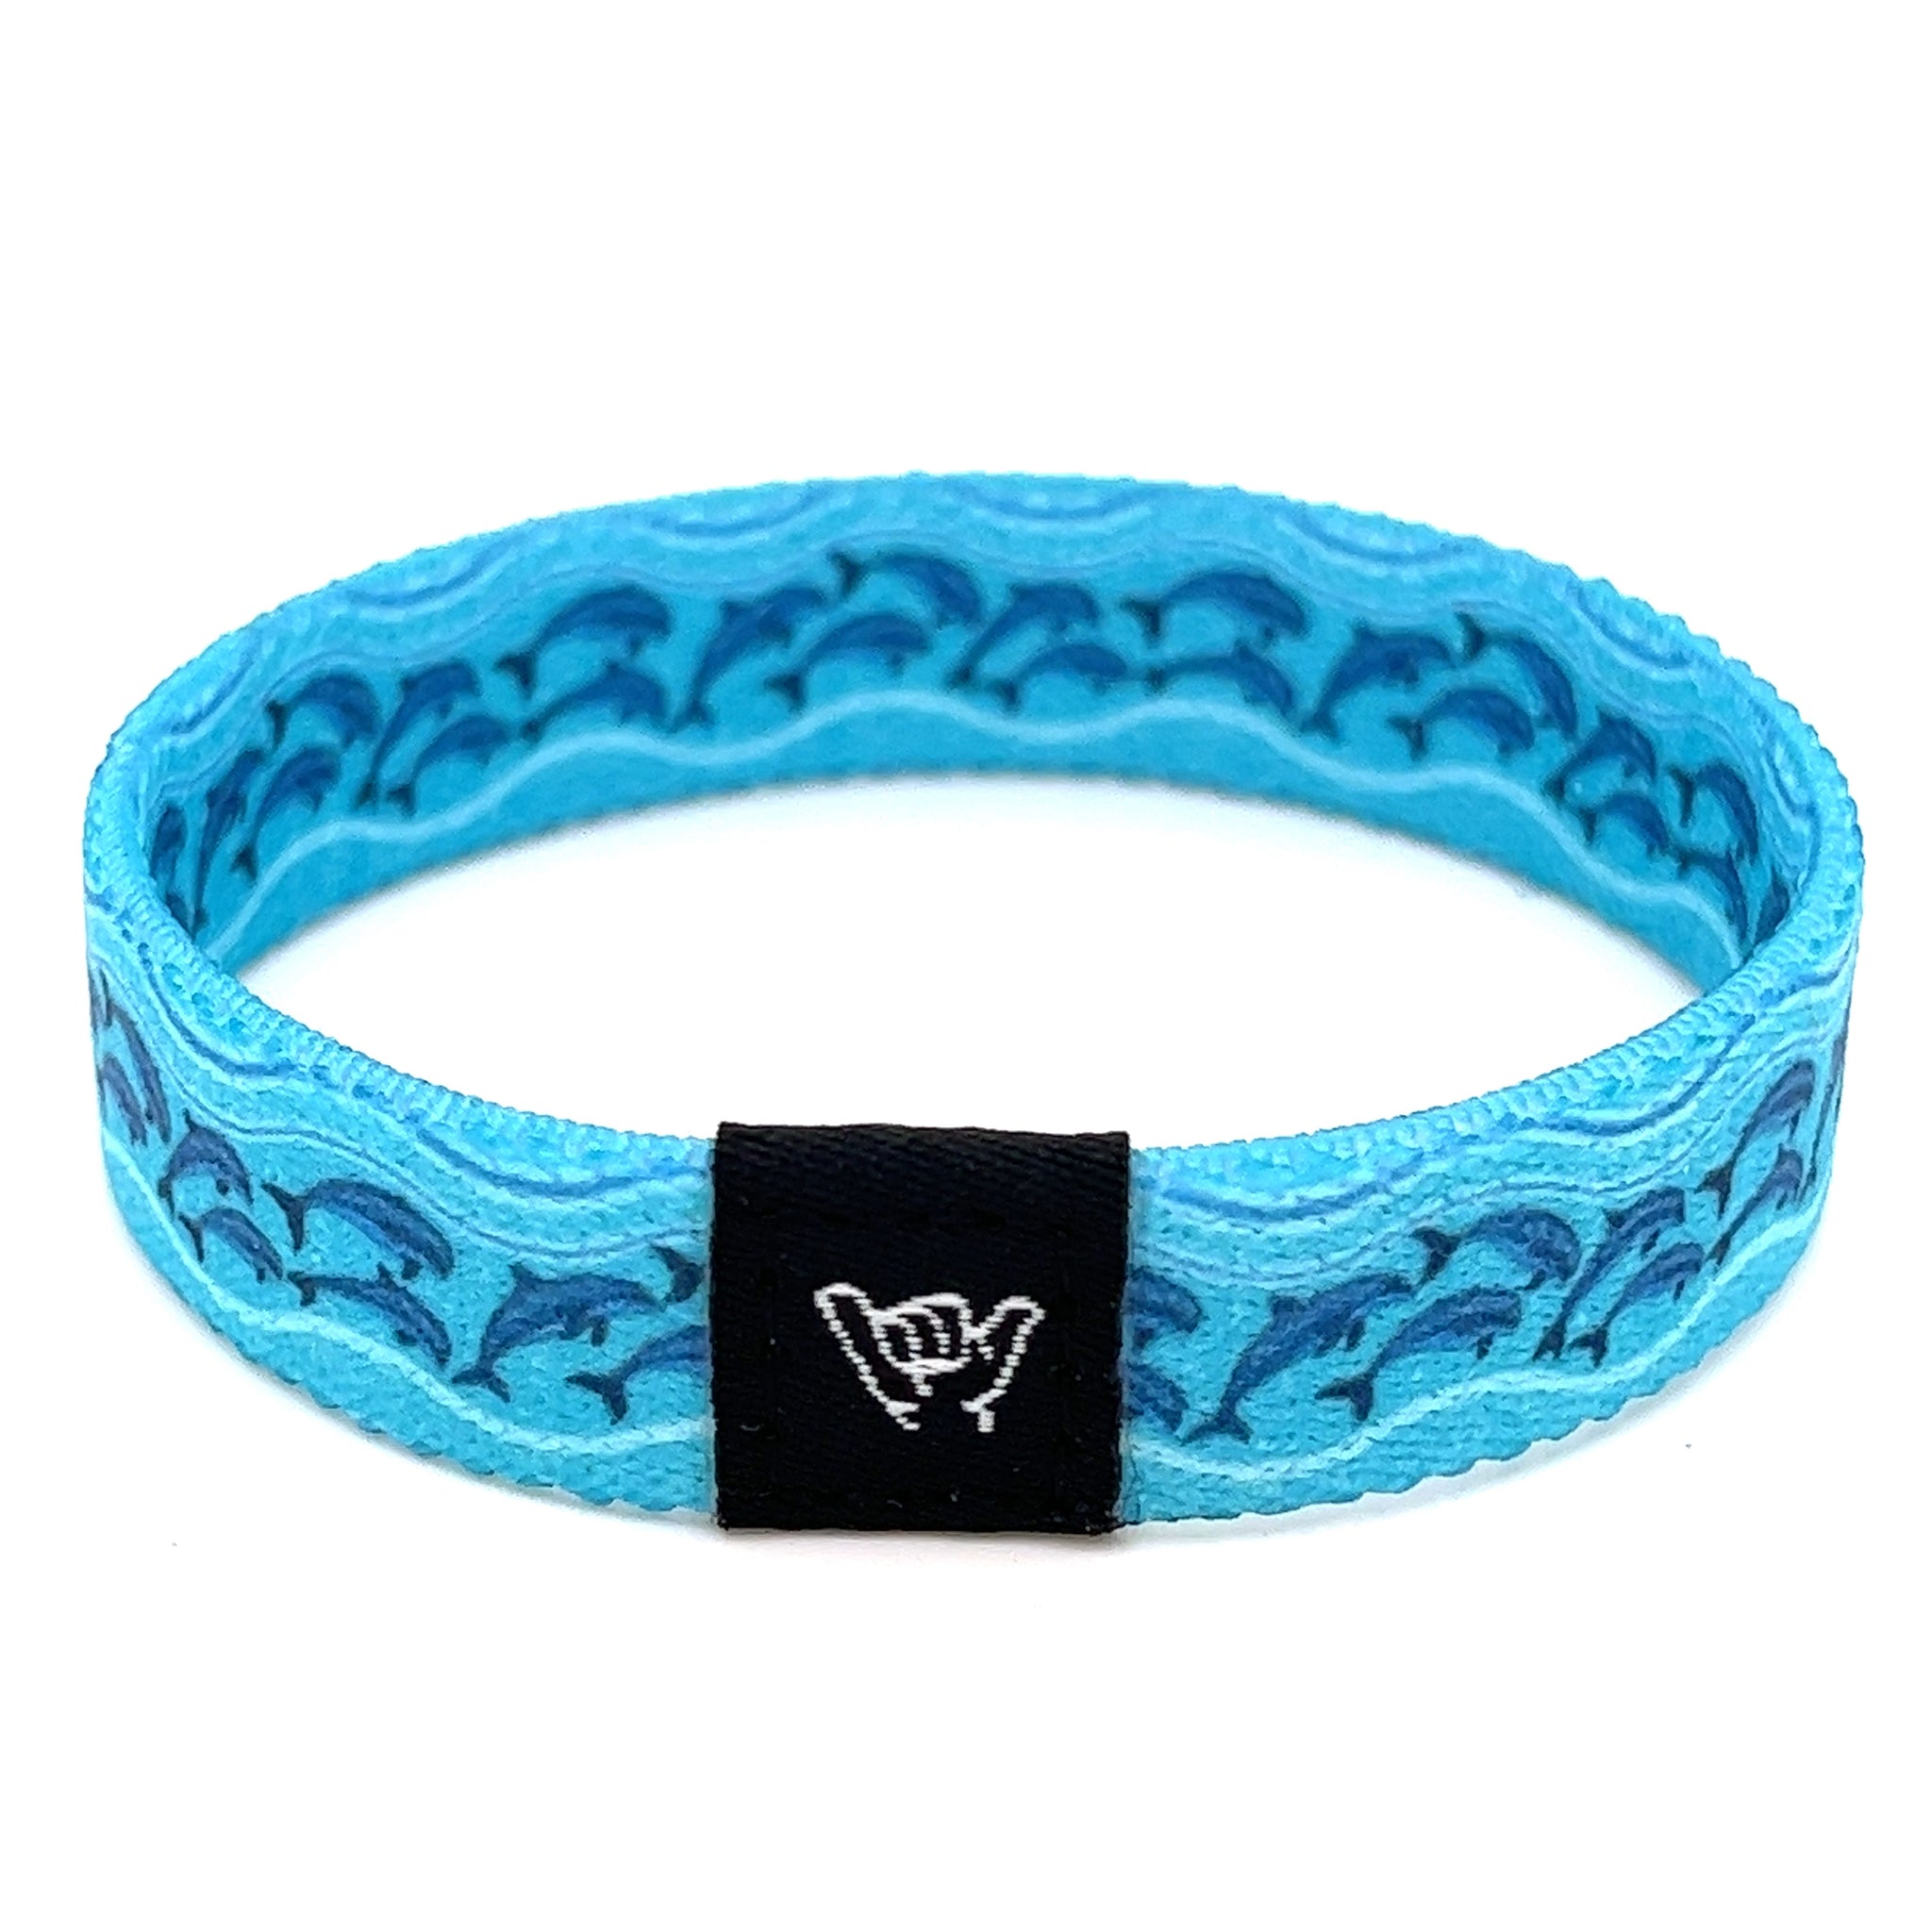 School of Dolphins Bands Hang Bracelet Wristband – Loose